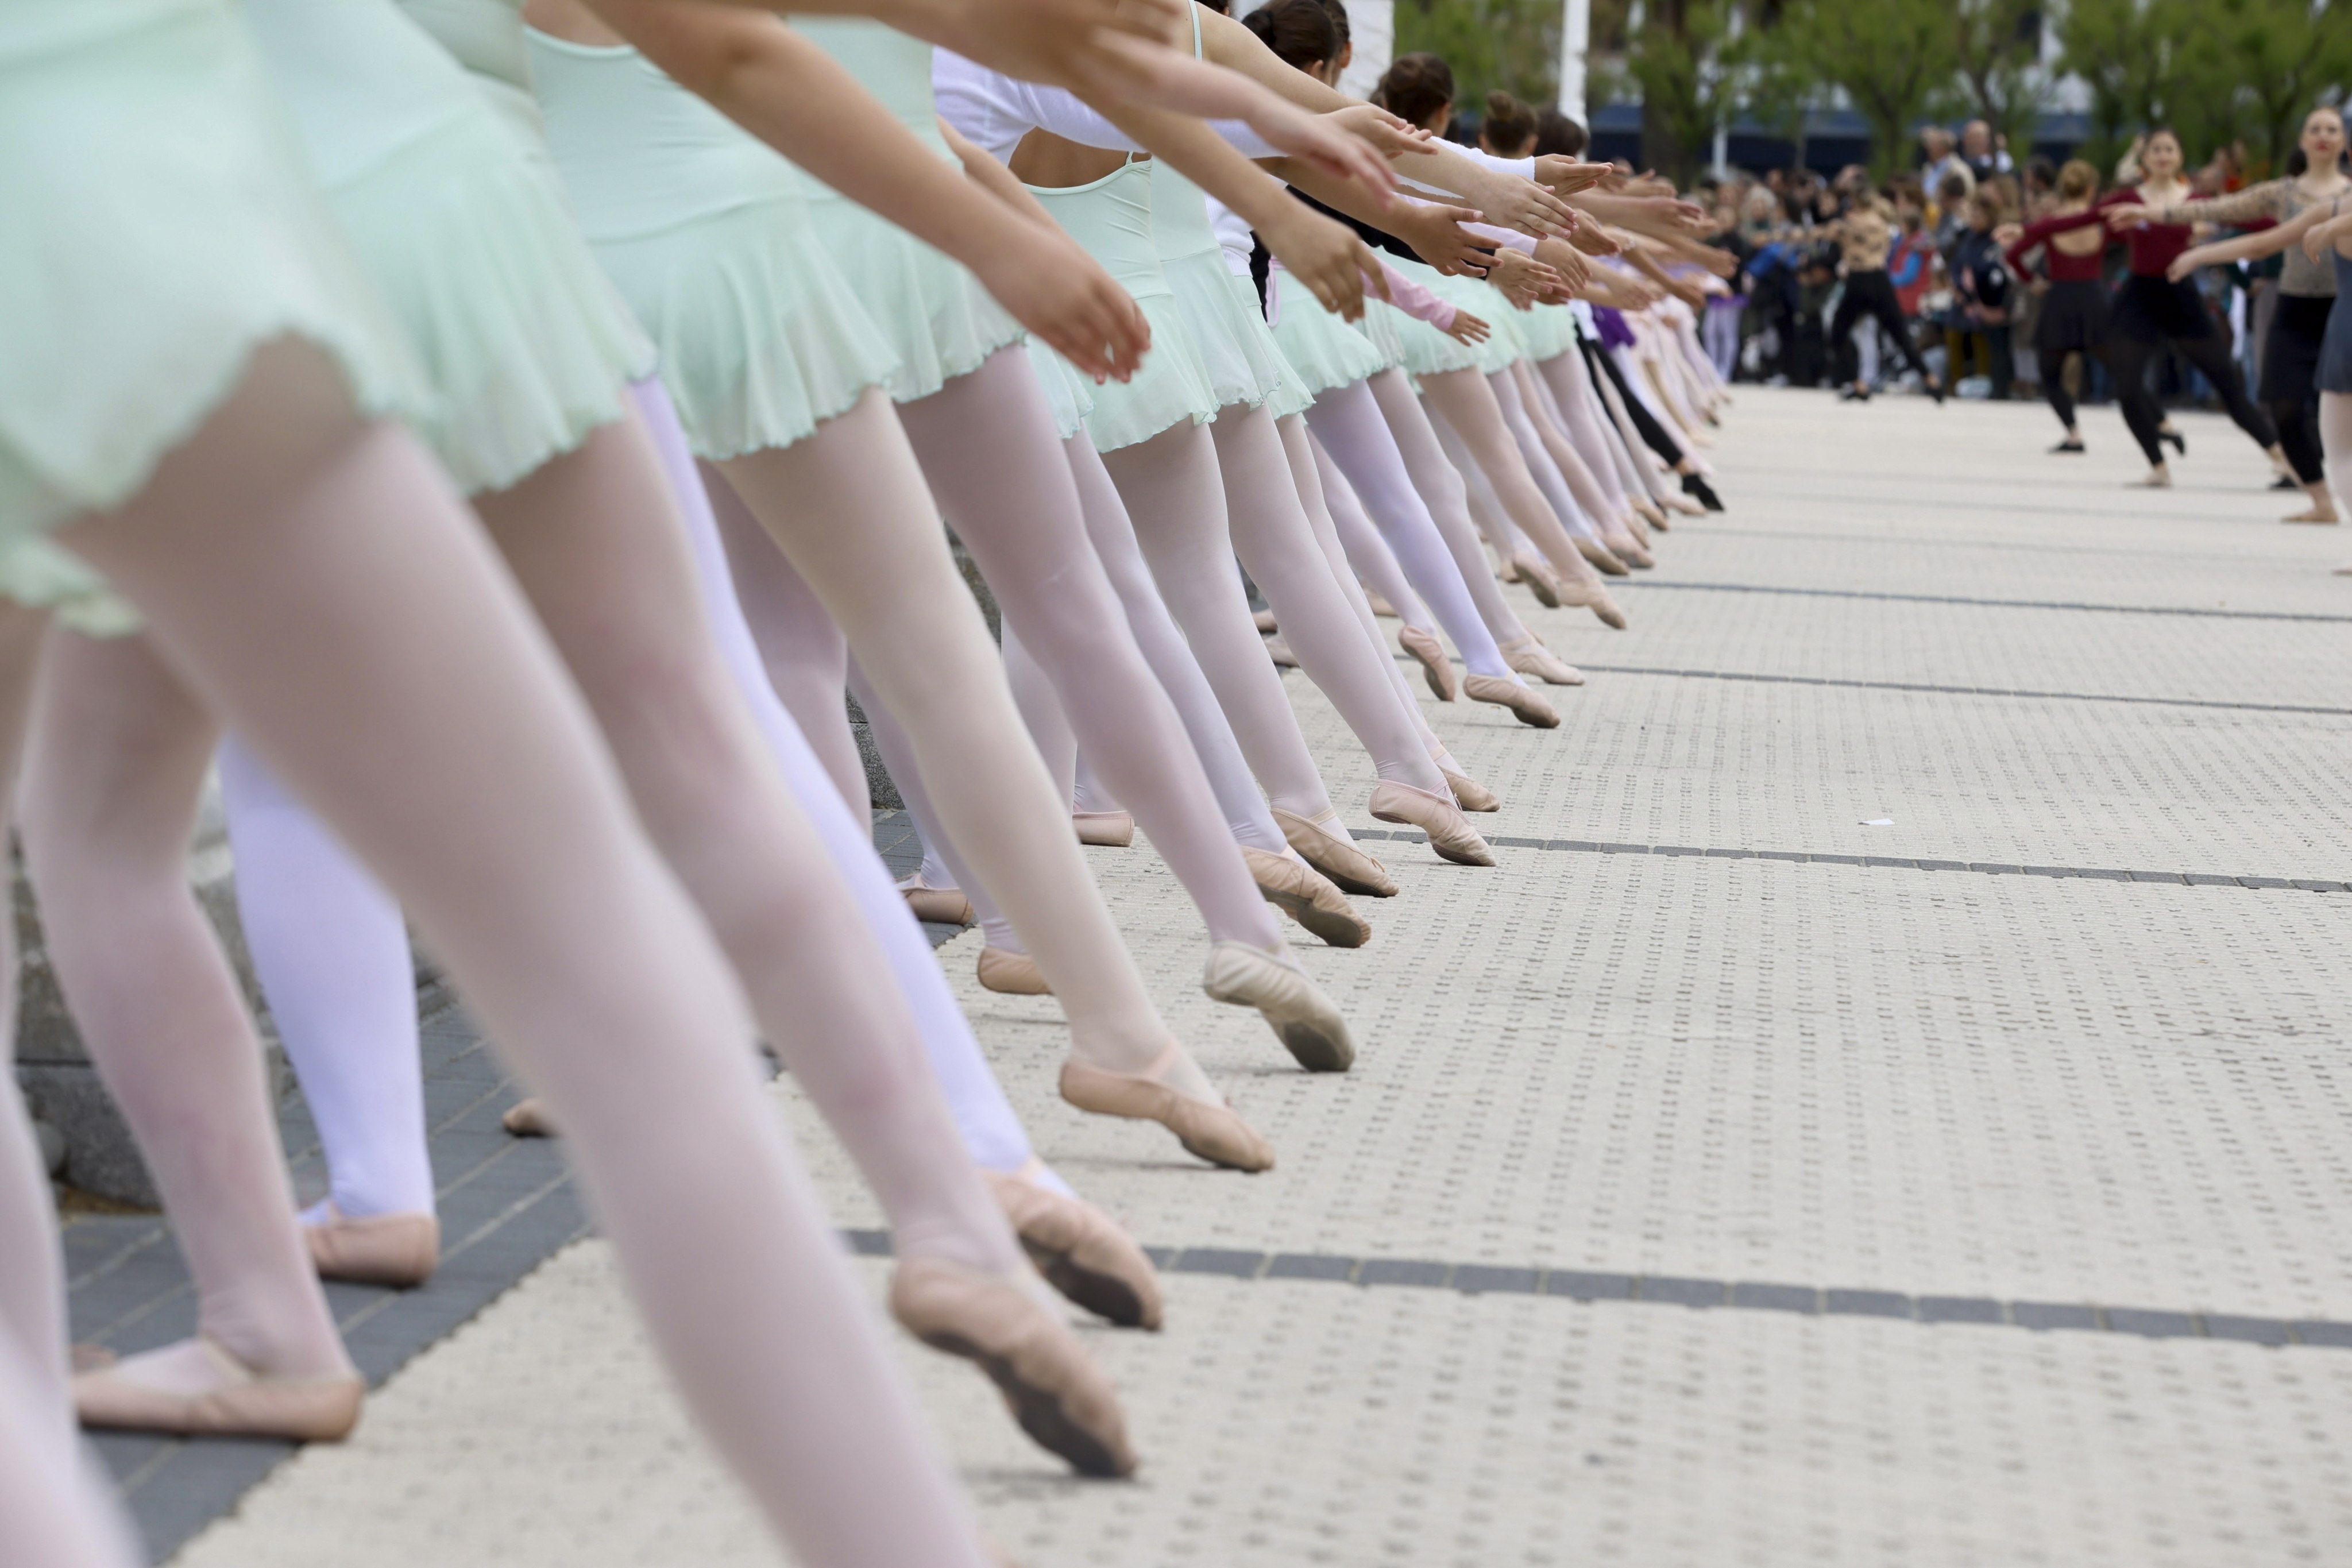 Ballet dancers perform in Spain. The Singapore school that Chua frequented, which caters to students aged two and above, cannot be named for legal reasons. Photo: EPA-EFE